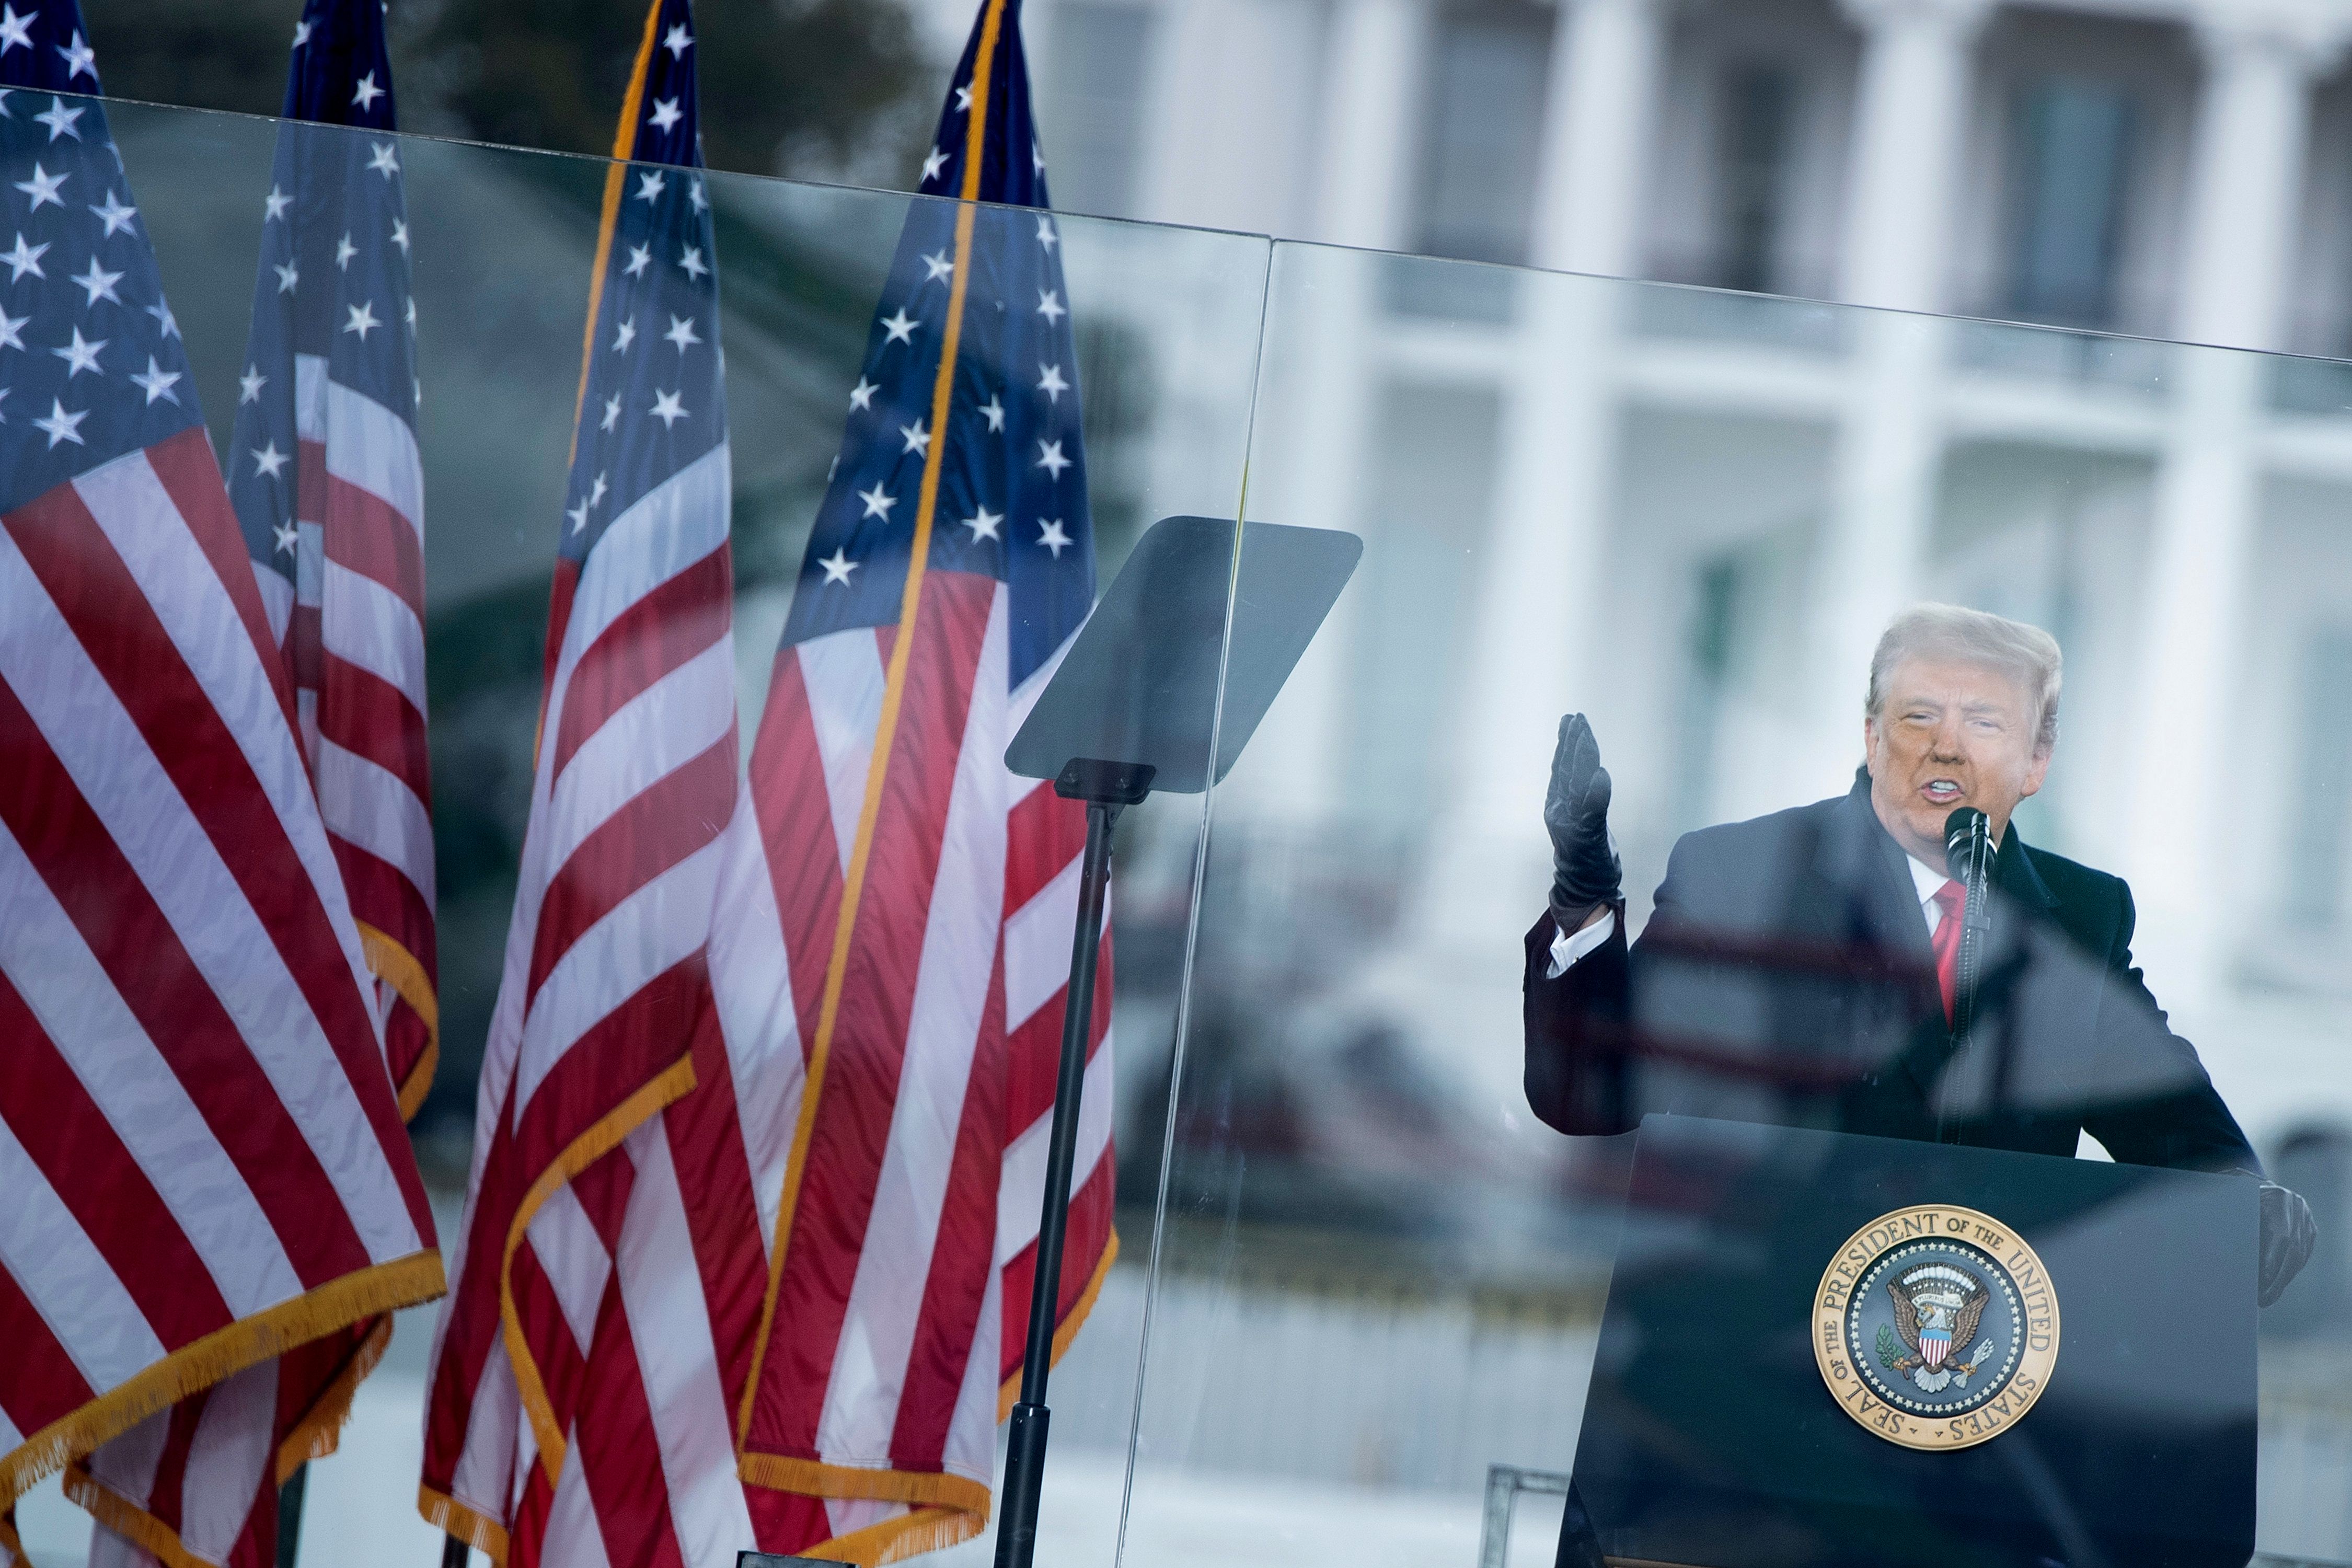 Trump, in a black overcoat and black leather gloves, speaks behind bulletproof glass, a row of US flags behind him. The camera is tilted, making it seem as if Trump is about to tilt over.